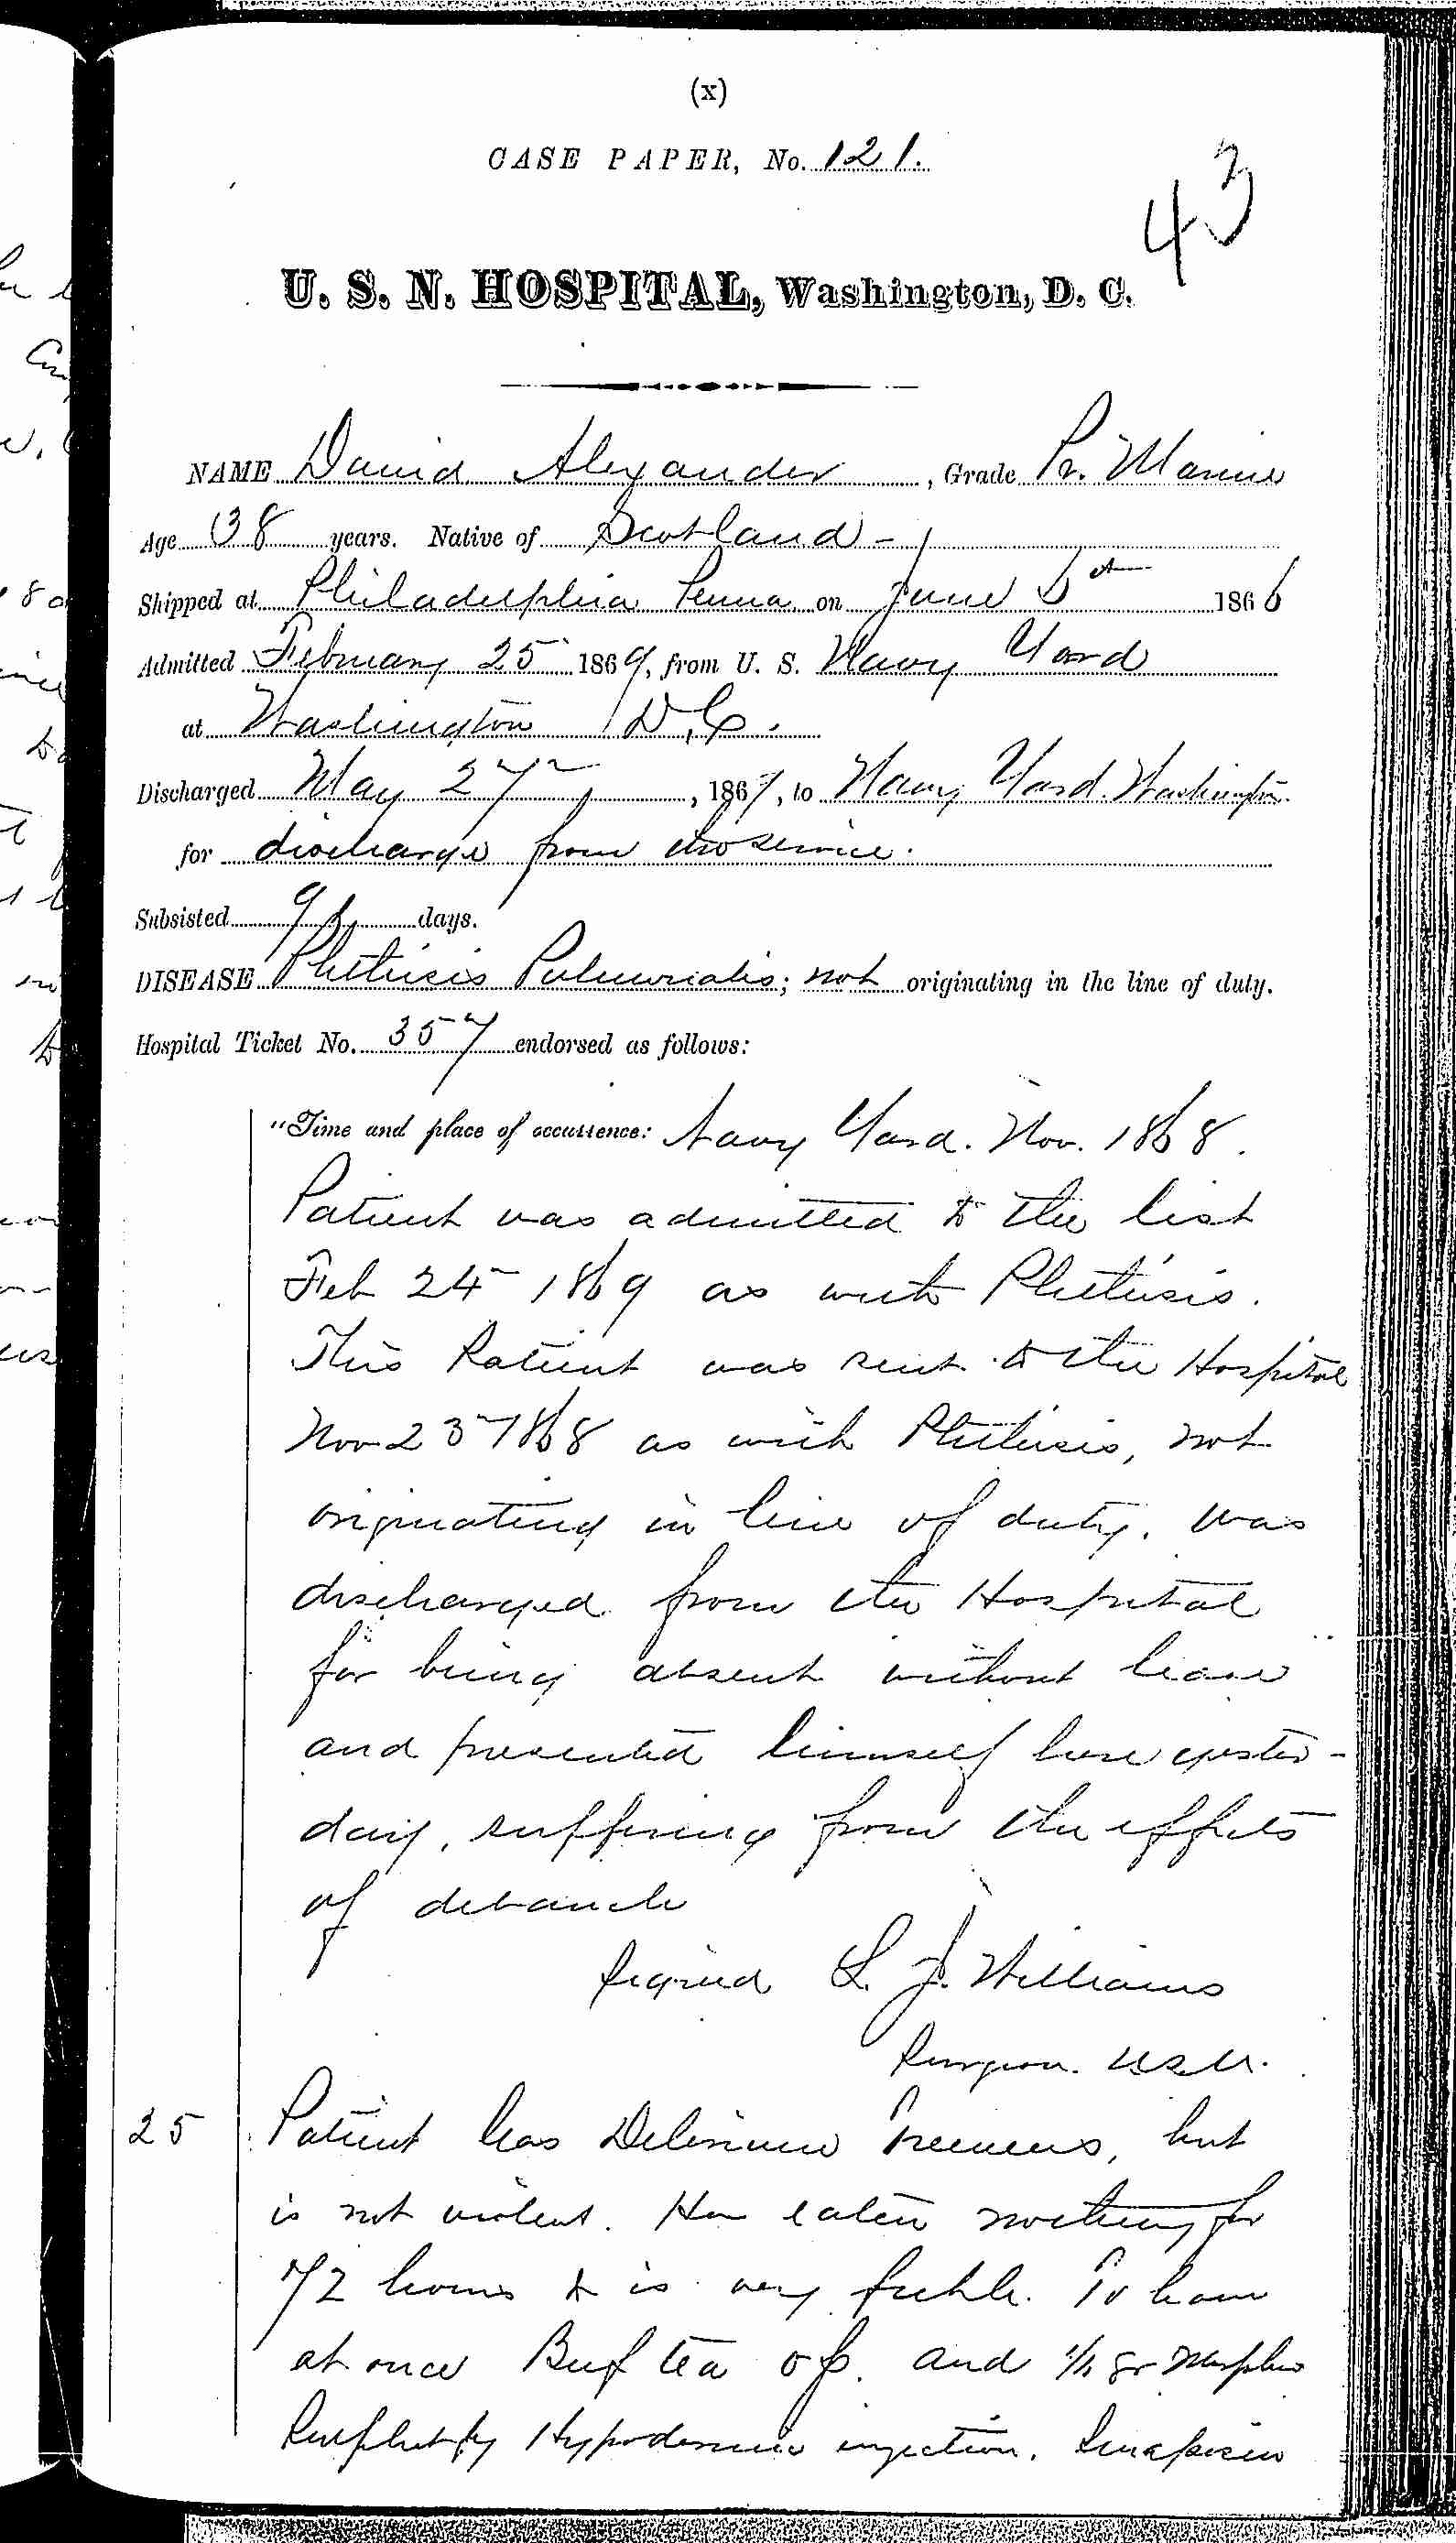 Entry for David Alexander (second admission page 1 of 3) in the log Hospital Tickets and Case Papers - Naval Hospital - Washington, D.C. - 1868-69